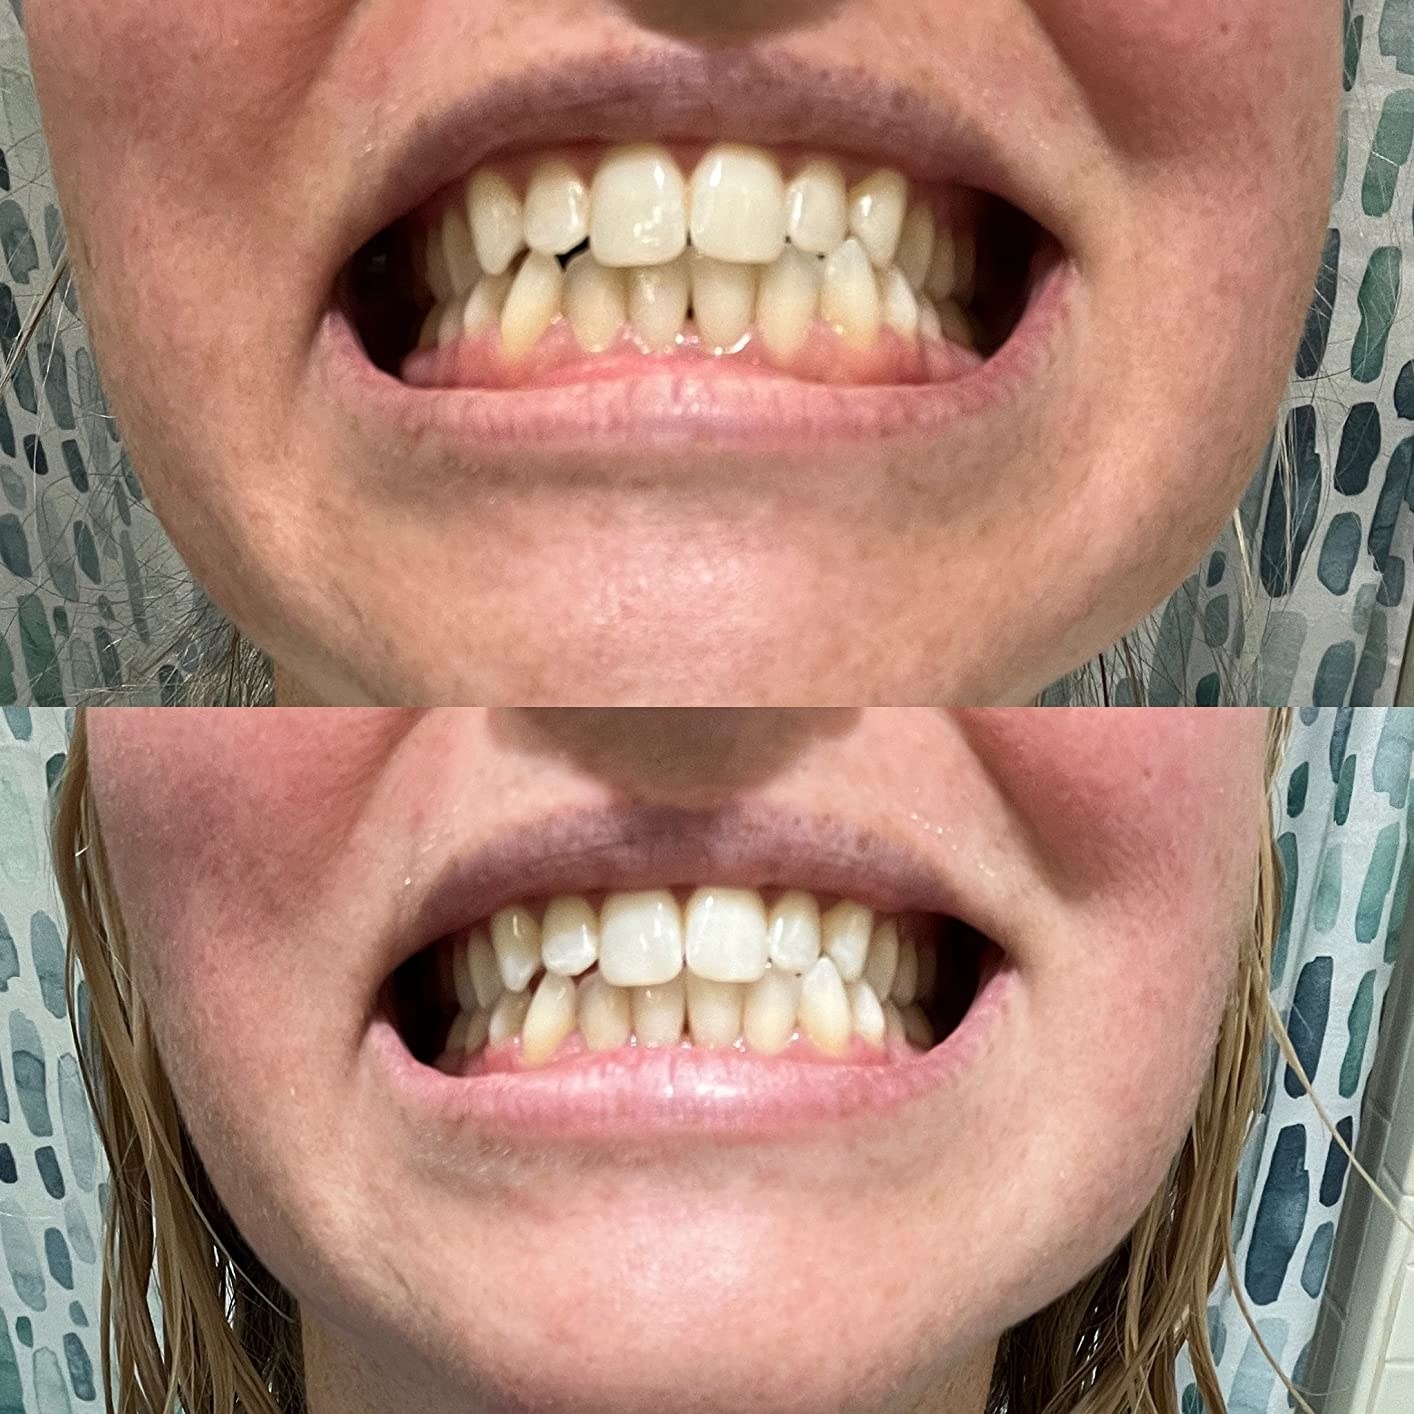 Reviewer showing teeth before and after using whitening strips